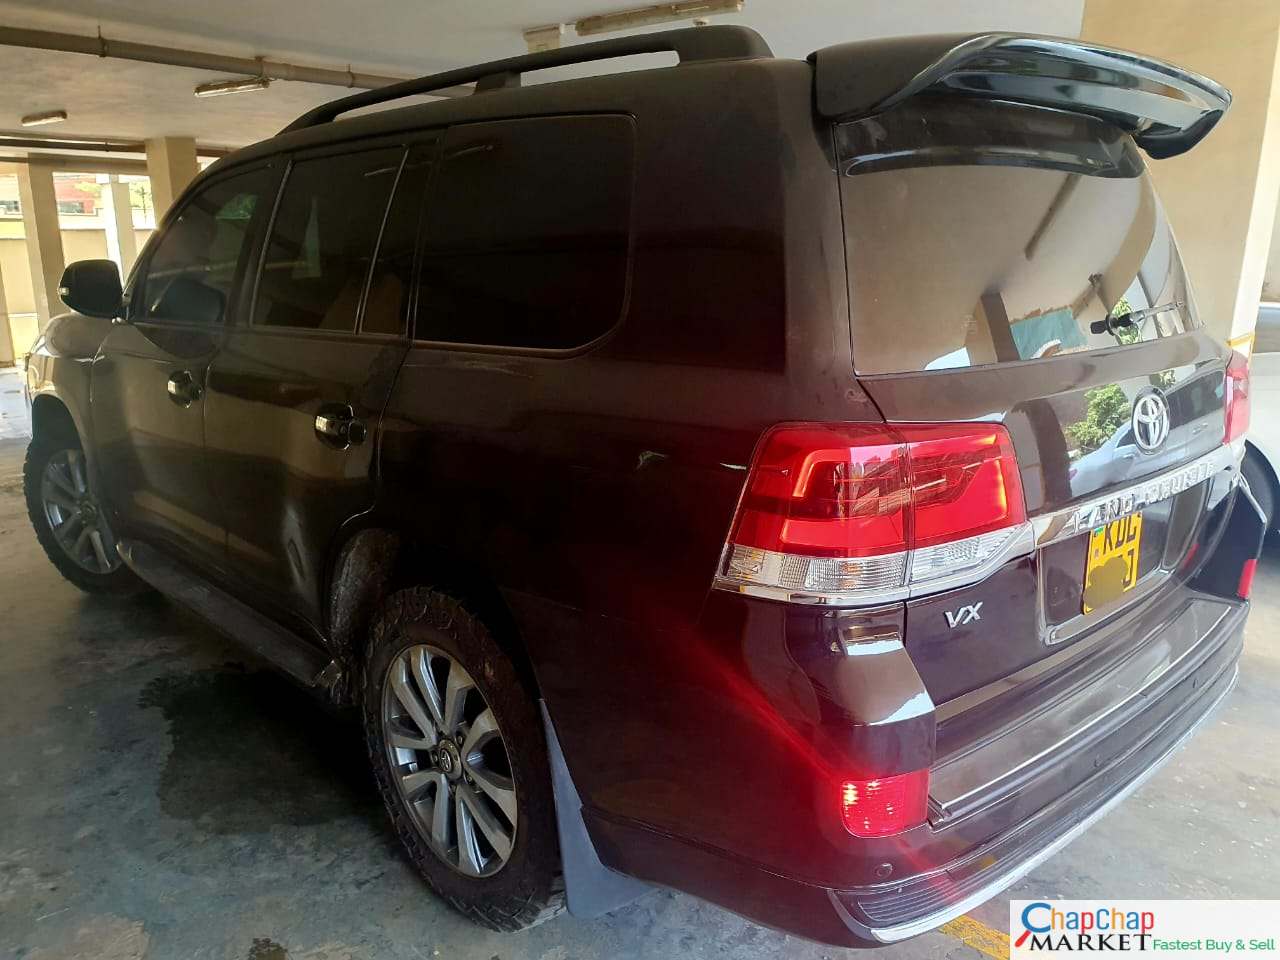 Toyota Land Cruiser ZX with 2020 facelift 6.2M You Pay 40% Deposit 70% installments